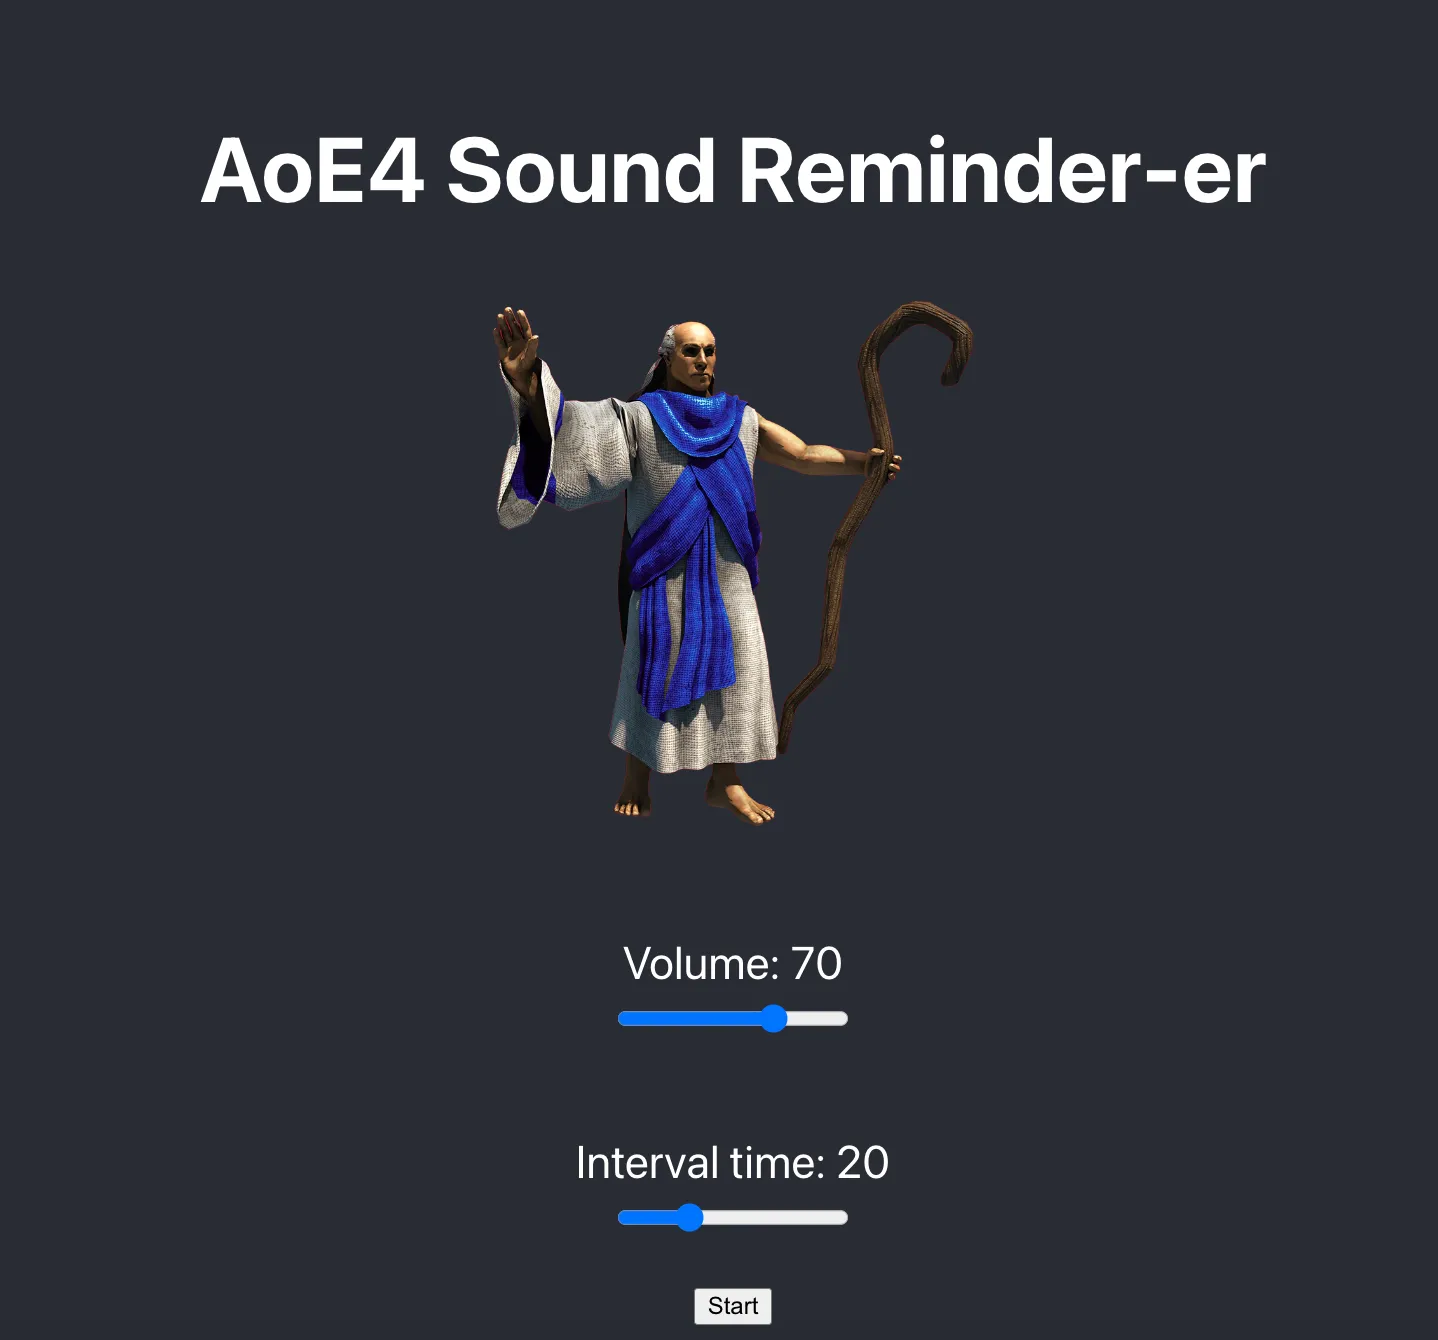 Picture of AoE4 sound reminderer's UI